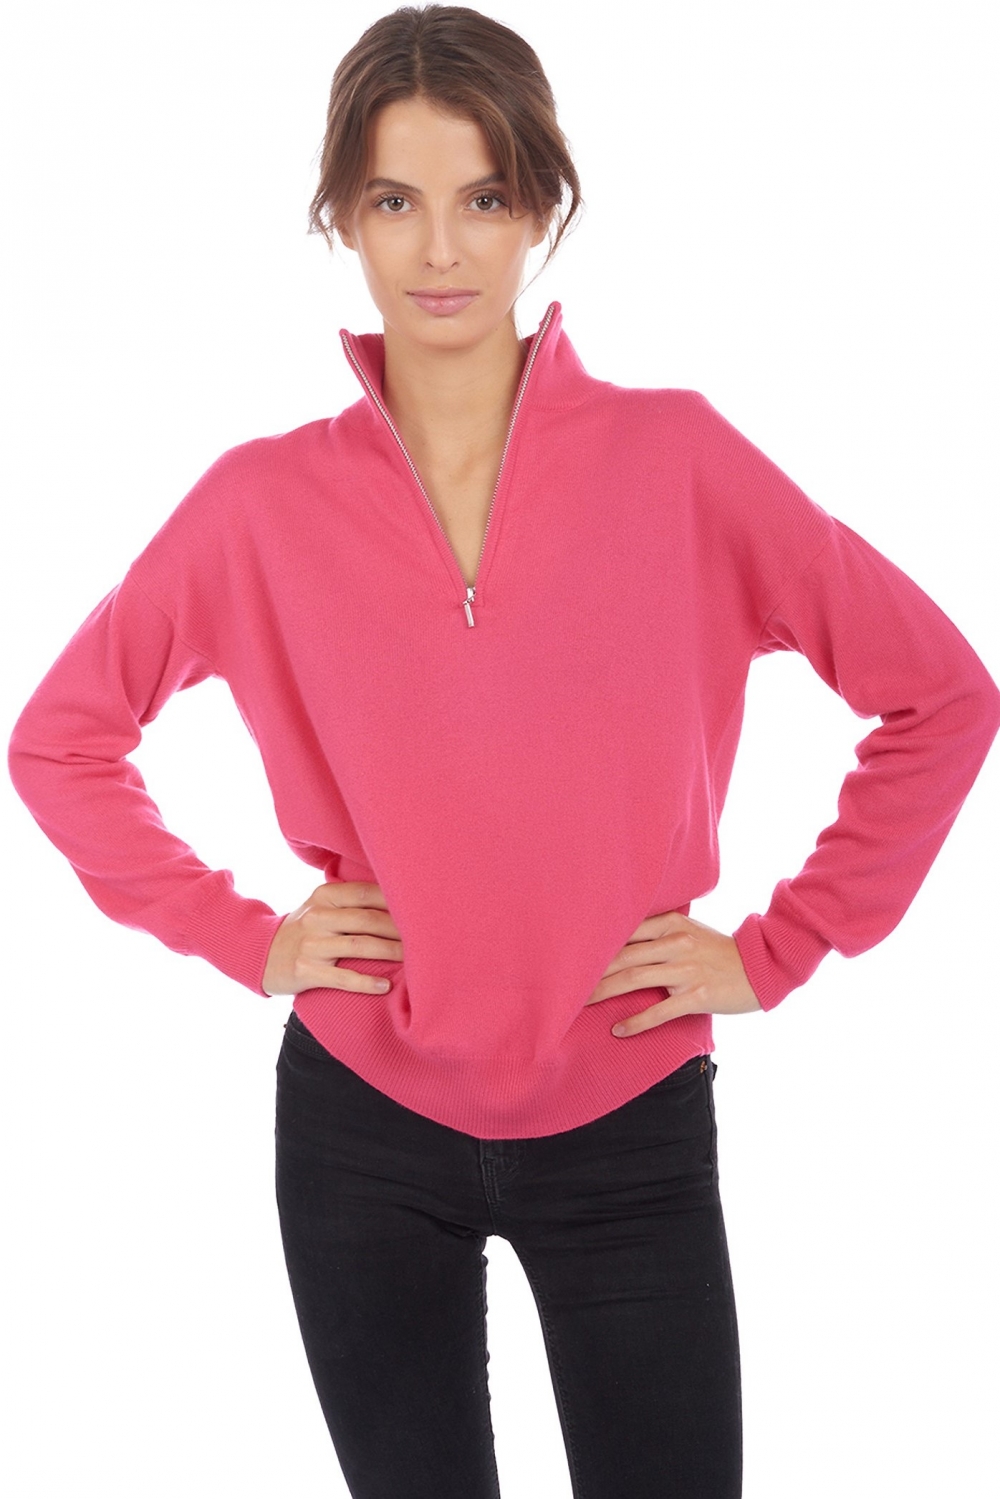 Cachemire pull femme col roule groseille rose shocking m